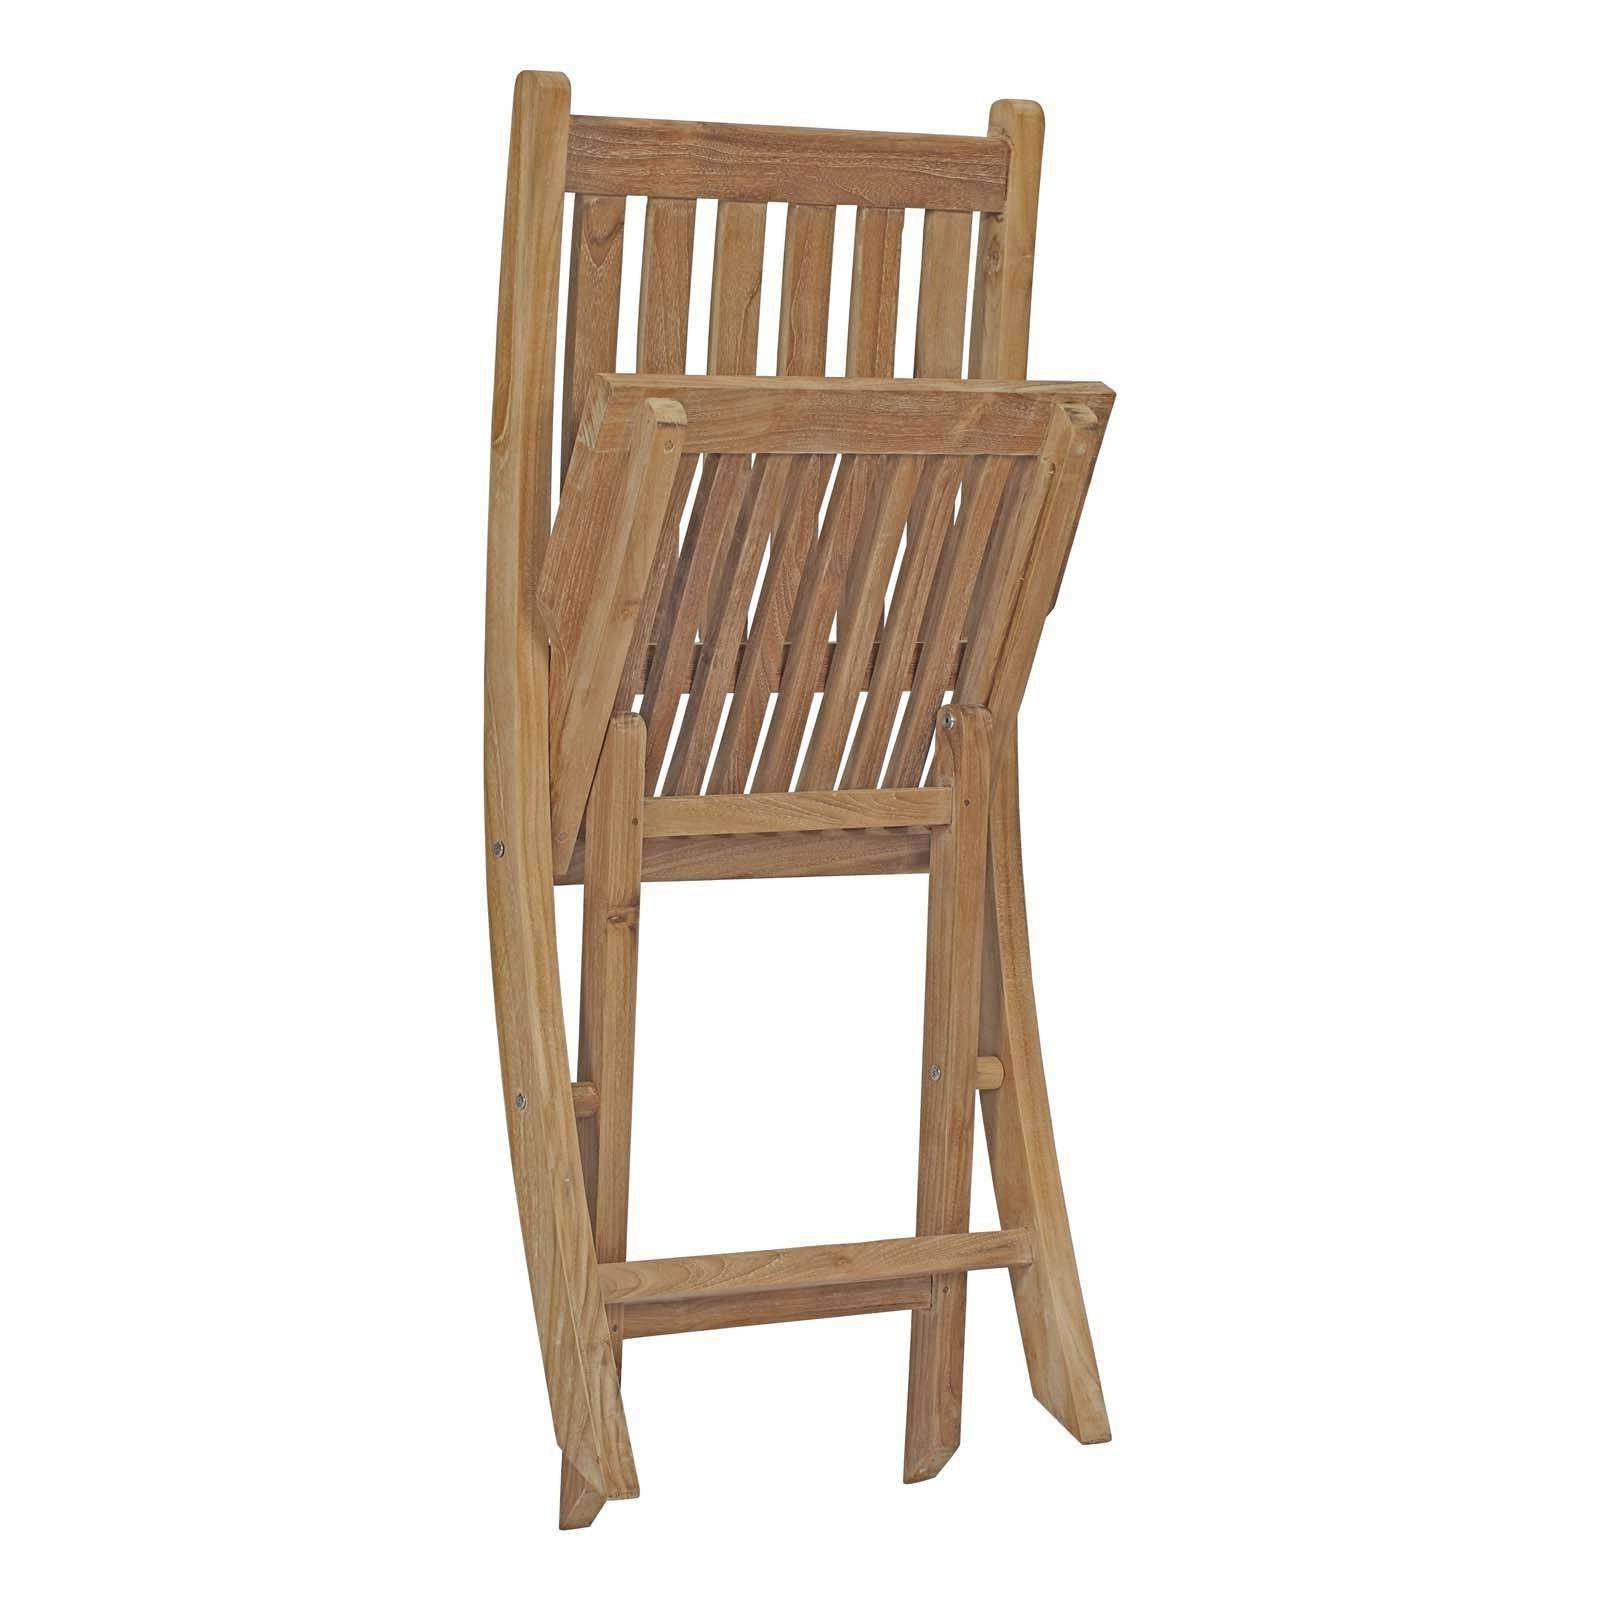 2019 Modterior :: Outdoor :: Outdoor Chairs :: Marina Outdoor Patio Teak With Regard To Teak Outdoor Folding Chairs Sets (View 15 of 15)